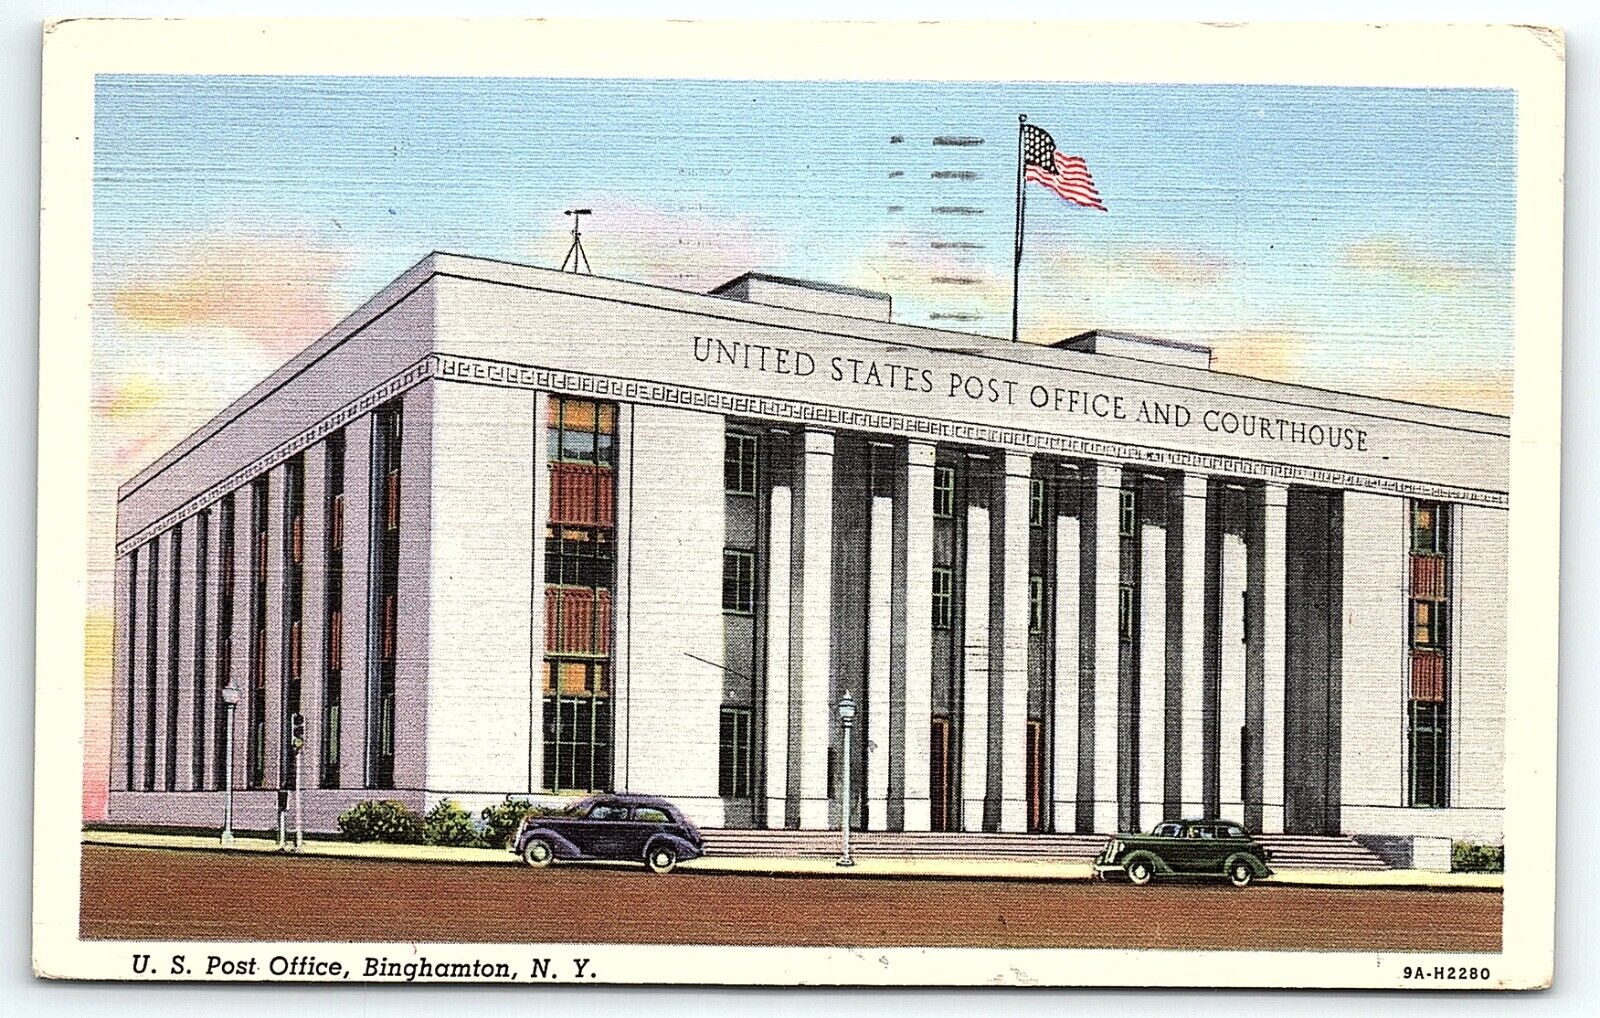 1939 BINGHAMTON NEW YORK NY U.S. POST OFFICE AND COURTHOUSE LINEN POSTCARD P2580